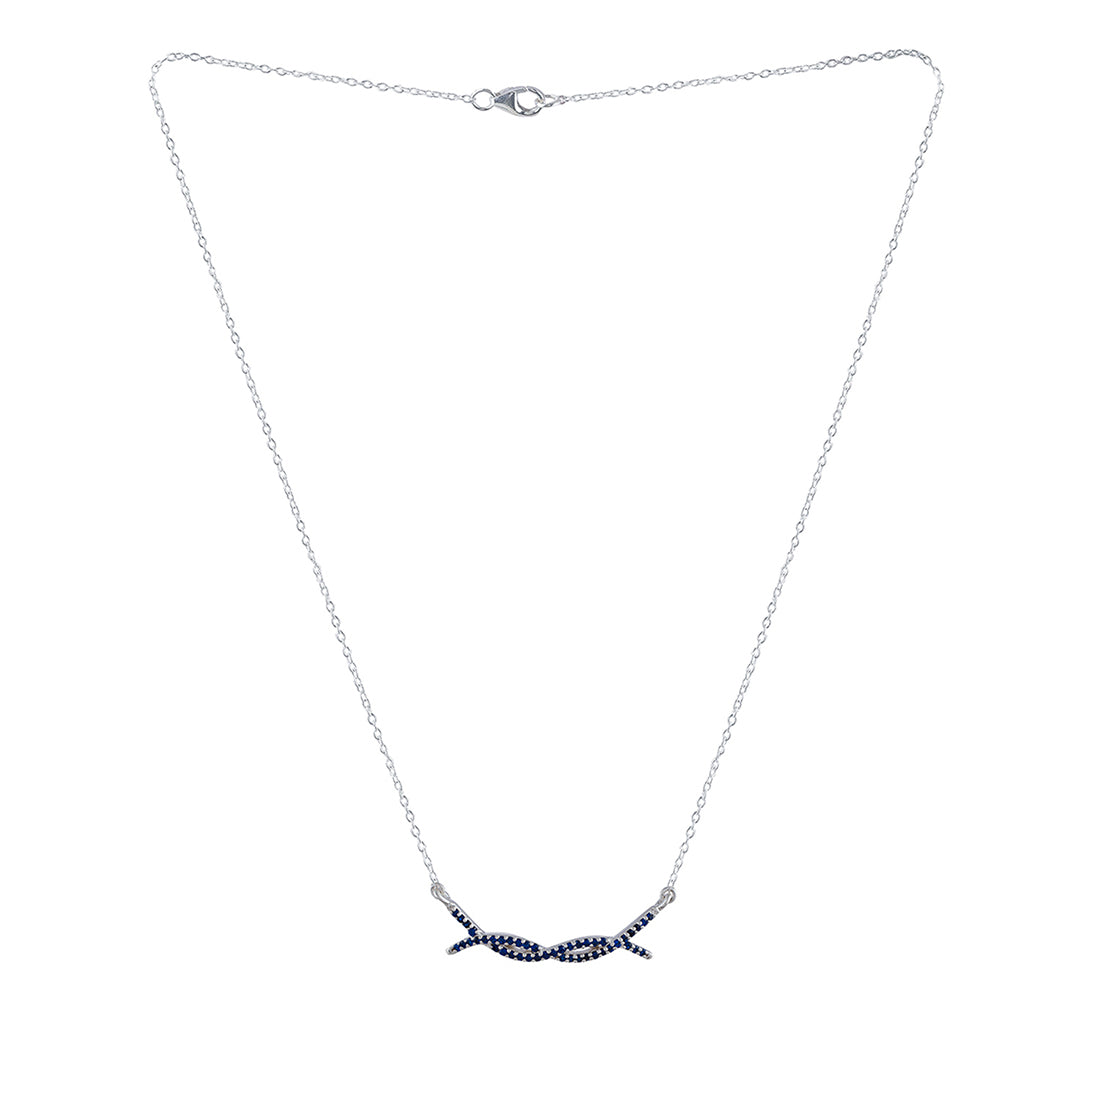 Stylish 925 Sterling Silver Necklace with Blues Stones